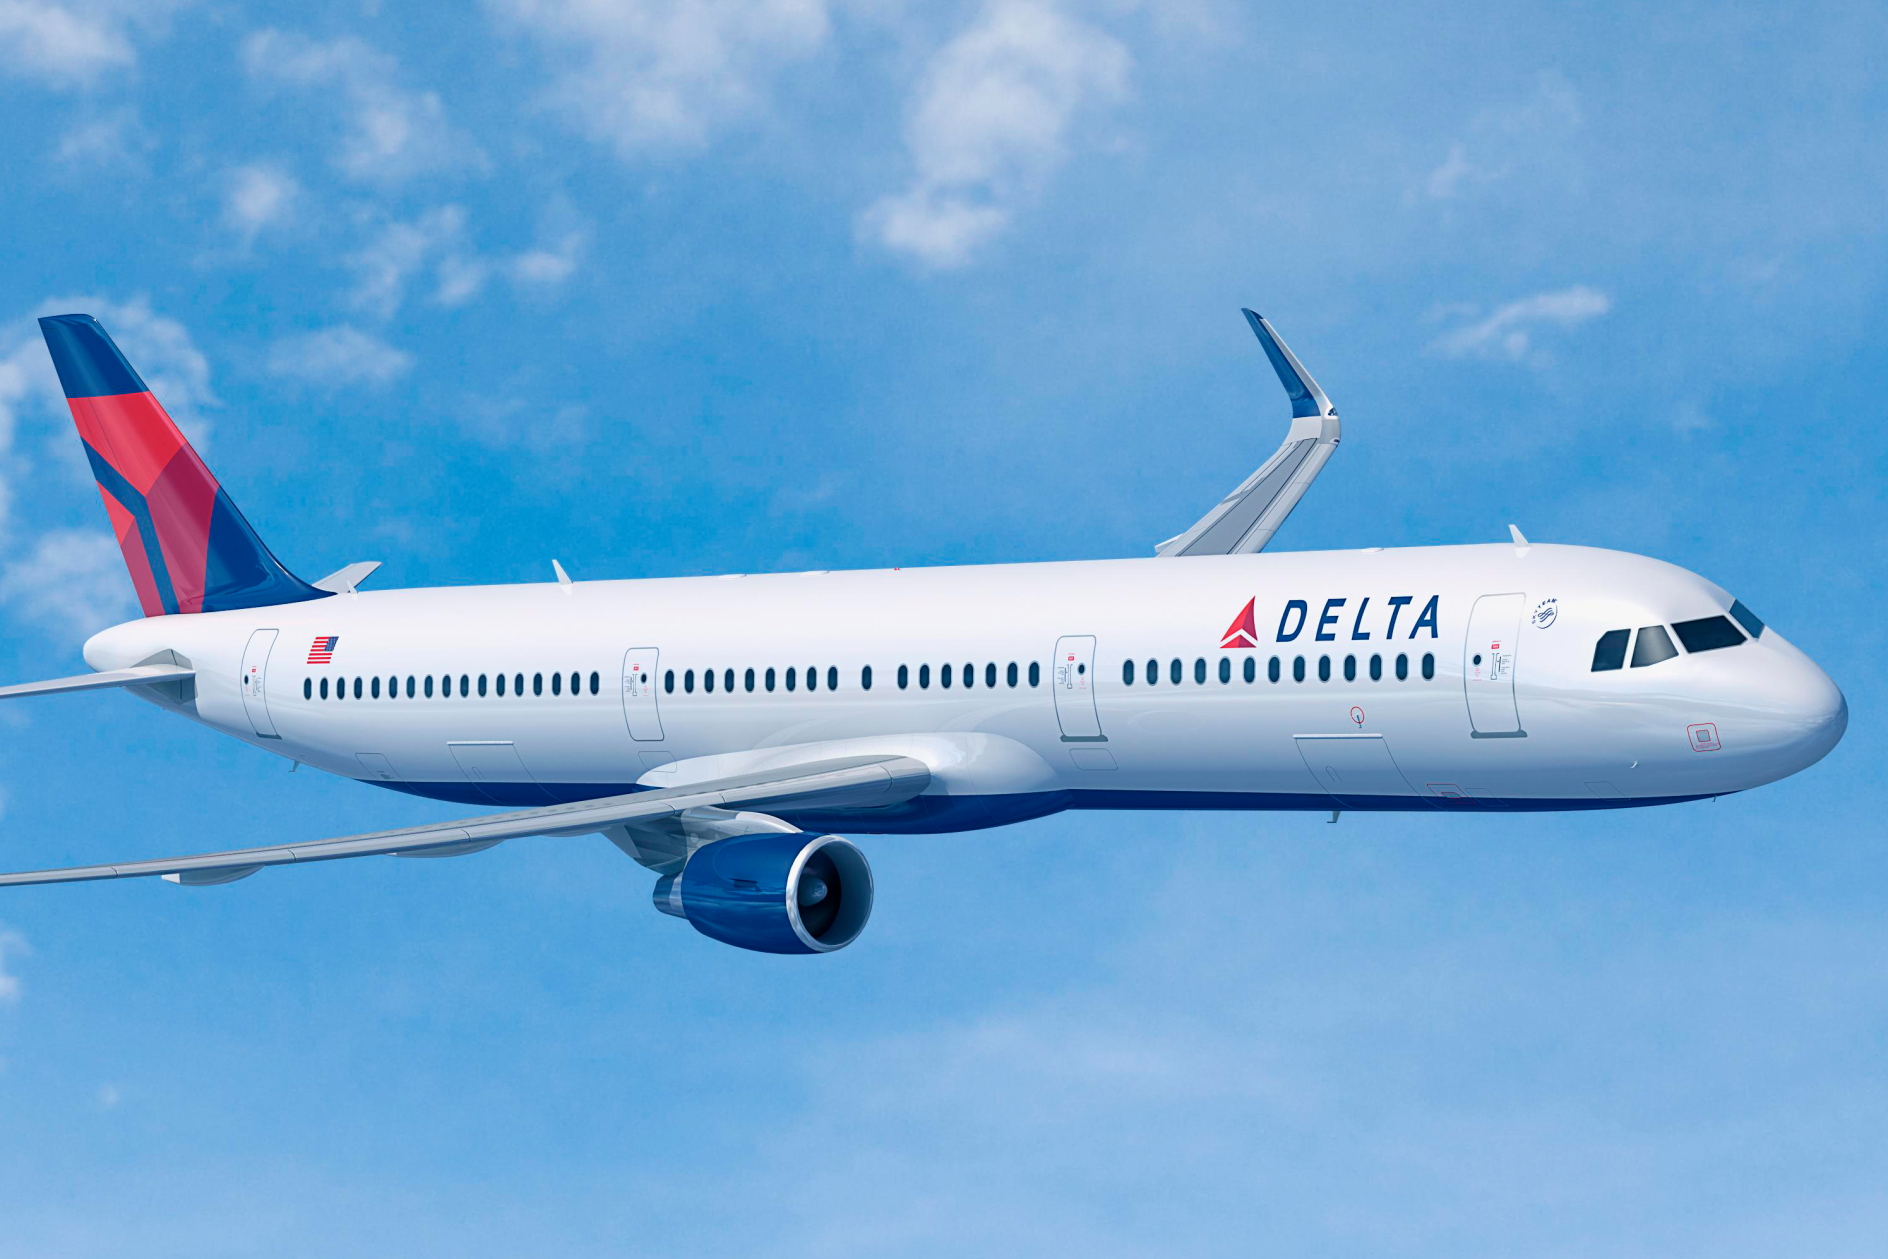 Delta has placed a firm order with Airbus for 25 A321neo aircraft. The planes will be powered by Pratt & Whitney PW1100G-JM engines. Click to enlarge.